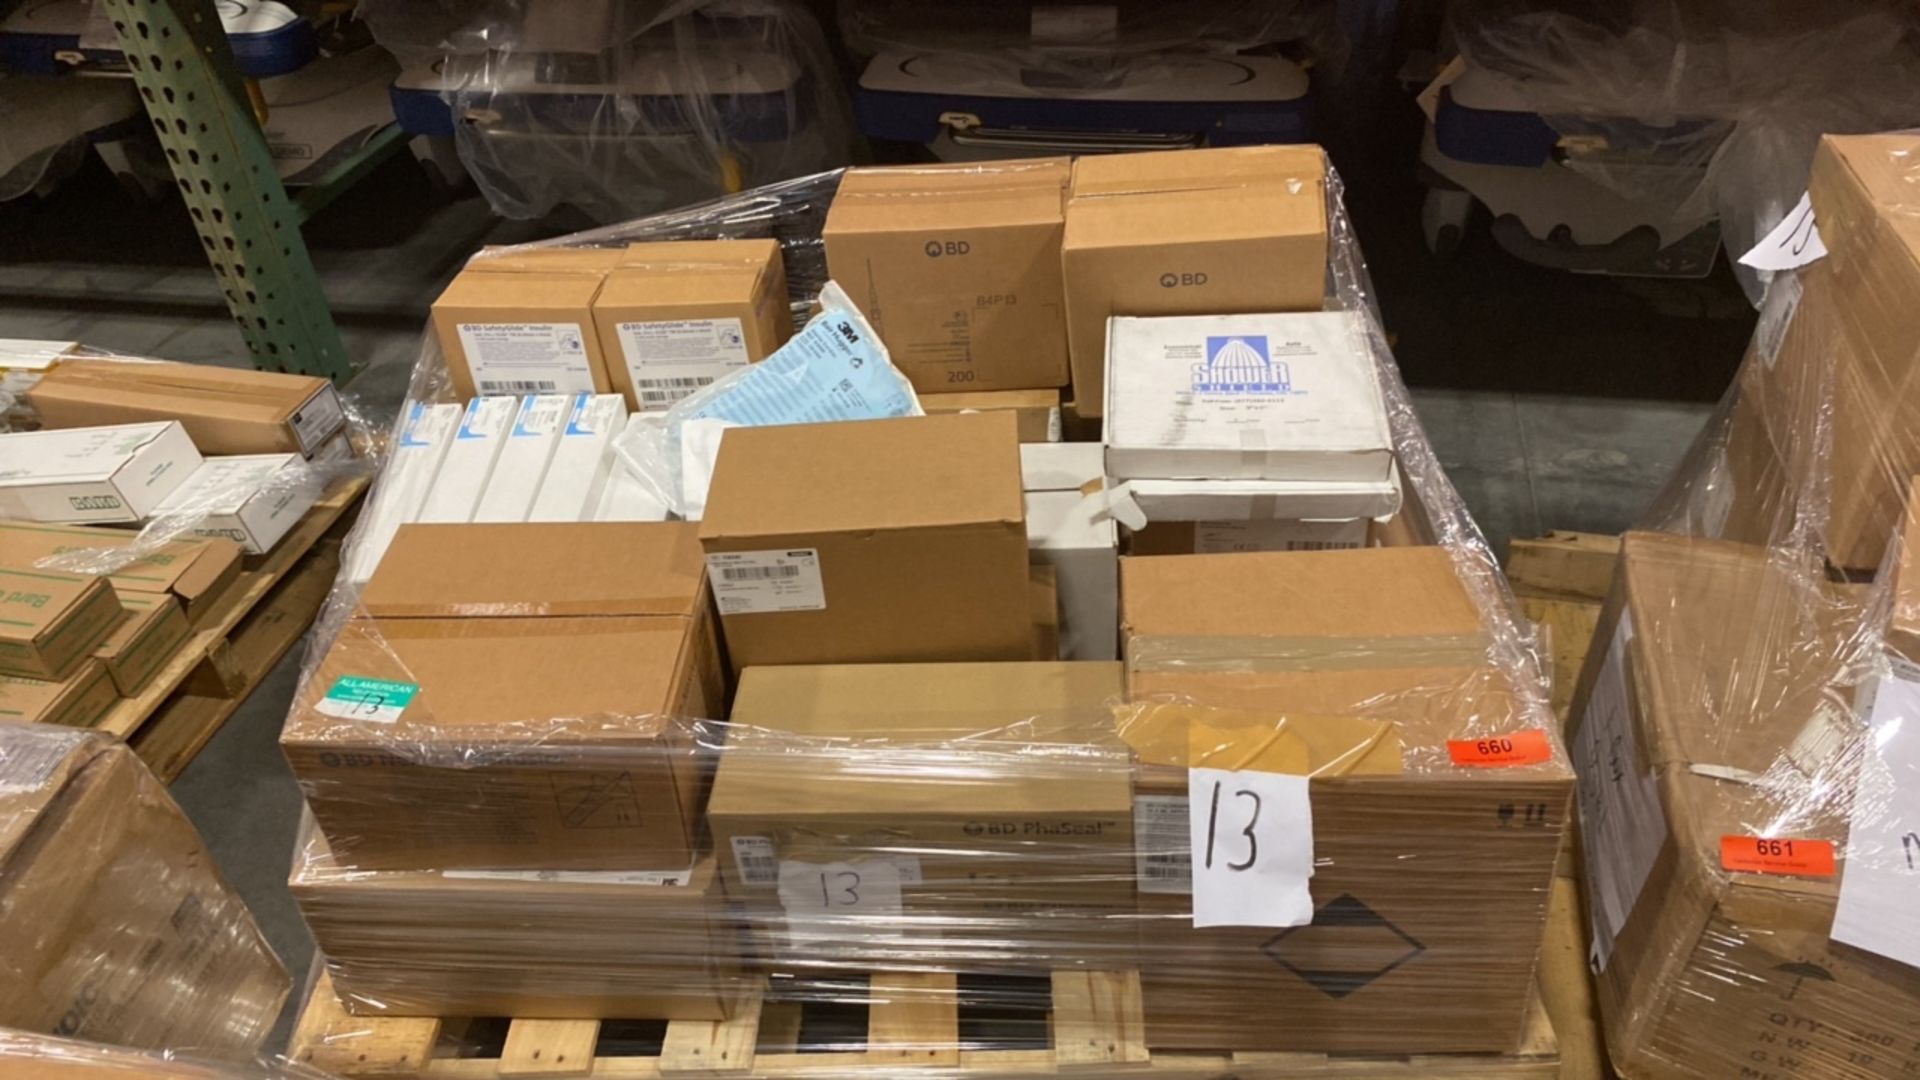 PALLET AND CONTENTS TO INCLUDE: 2 Boxes (200 indv.) of BD SafetyGlide Insulin U-100 Insulin